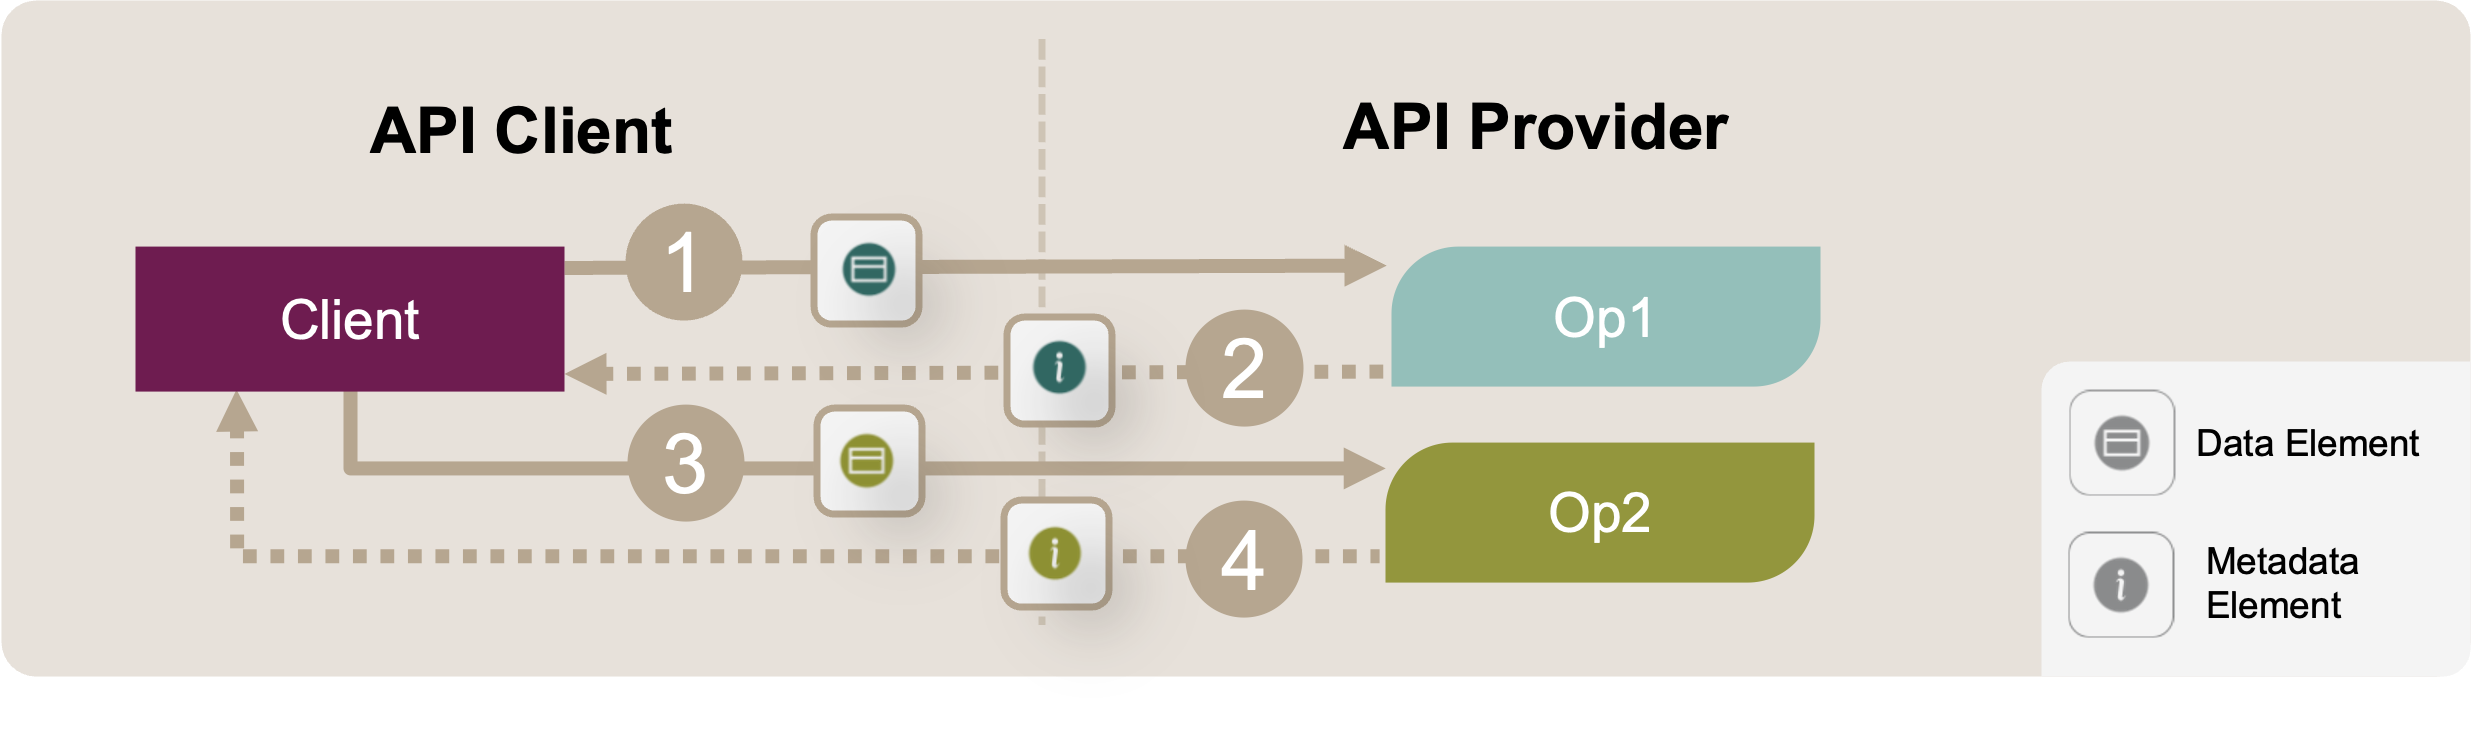 Merge Operations: Initial Position Sketch. The API provider offers two distinct operations (Op1, Op2). The client can invoke one (Request 1, Response 2) or the other (Request 3, Response 4). Some metadata and other data elements are exchanged.